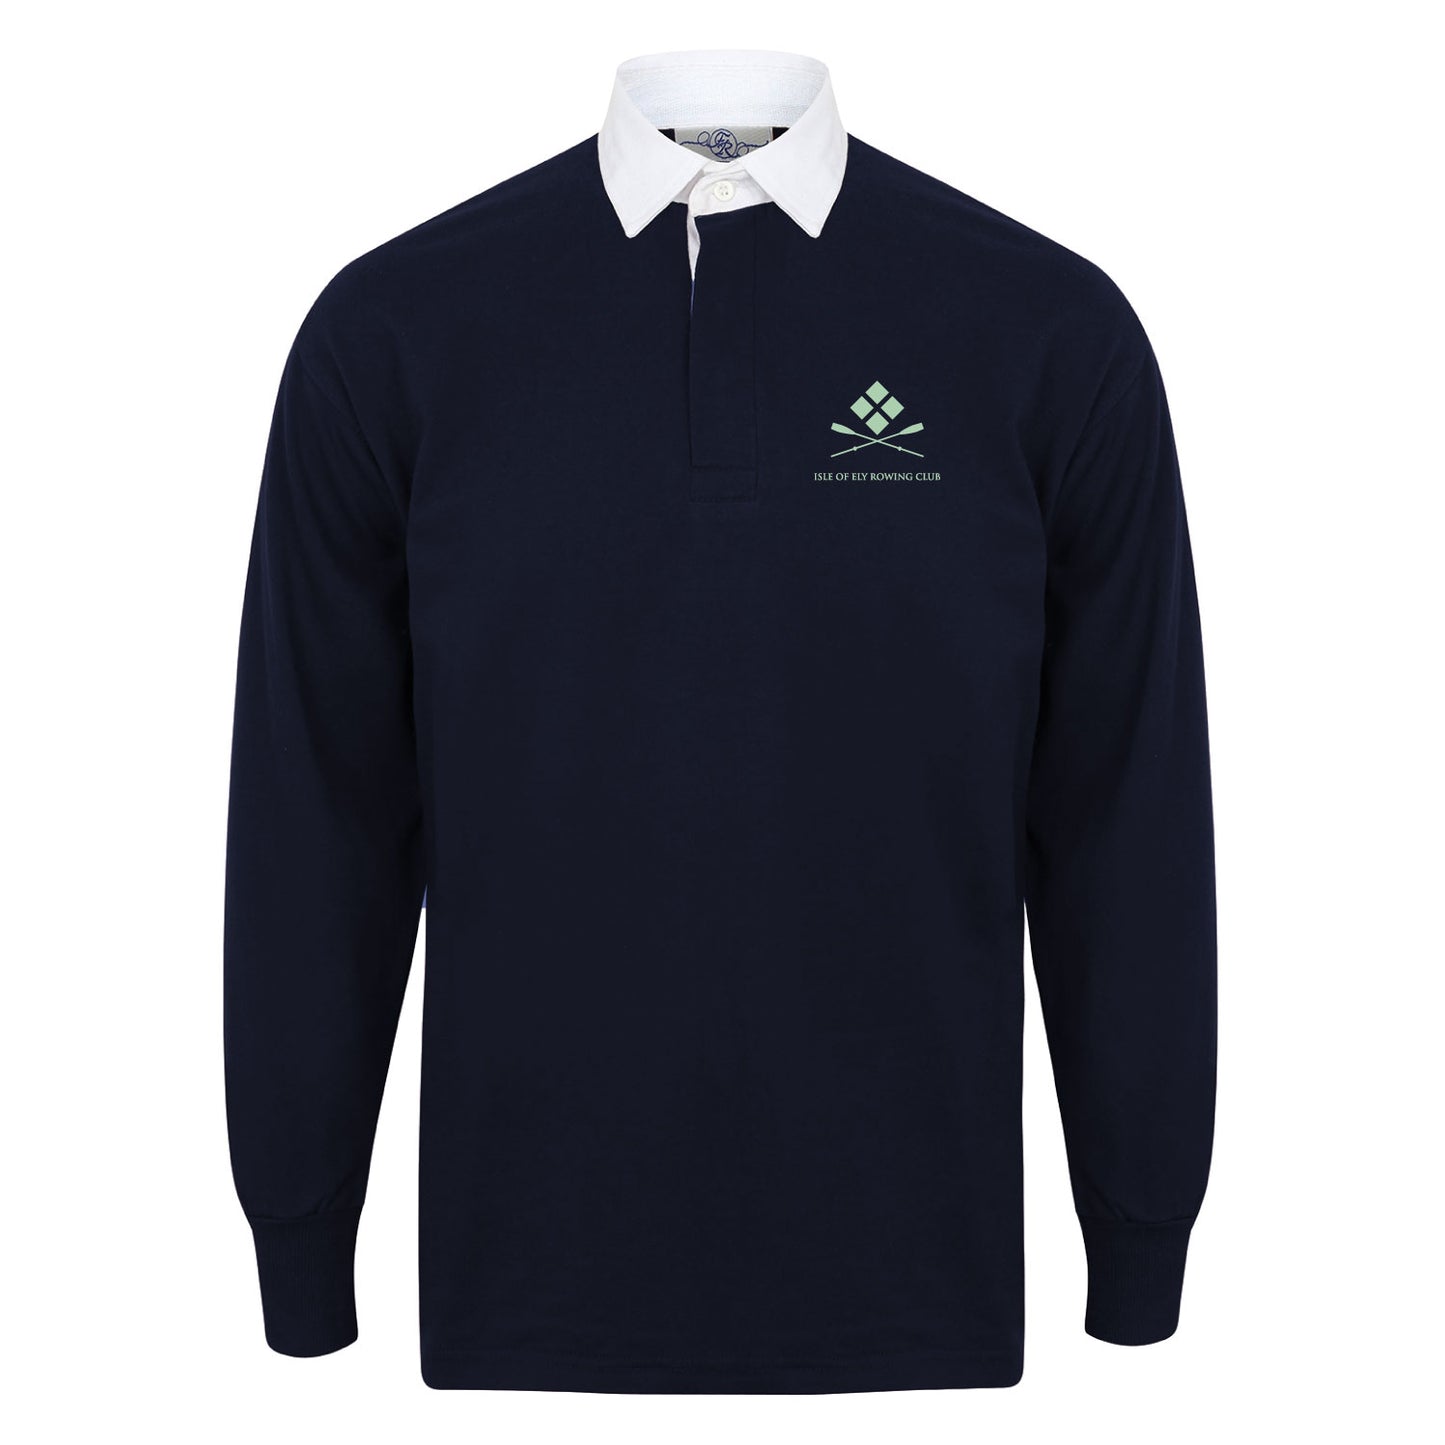 Isle of Ely Rowing Club Rugby Shirt